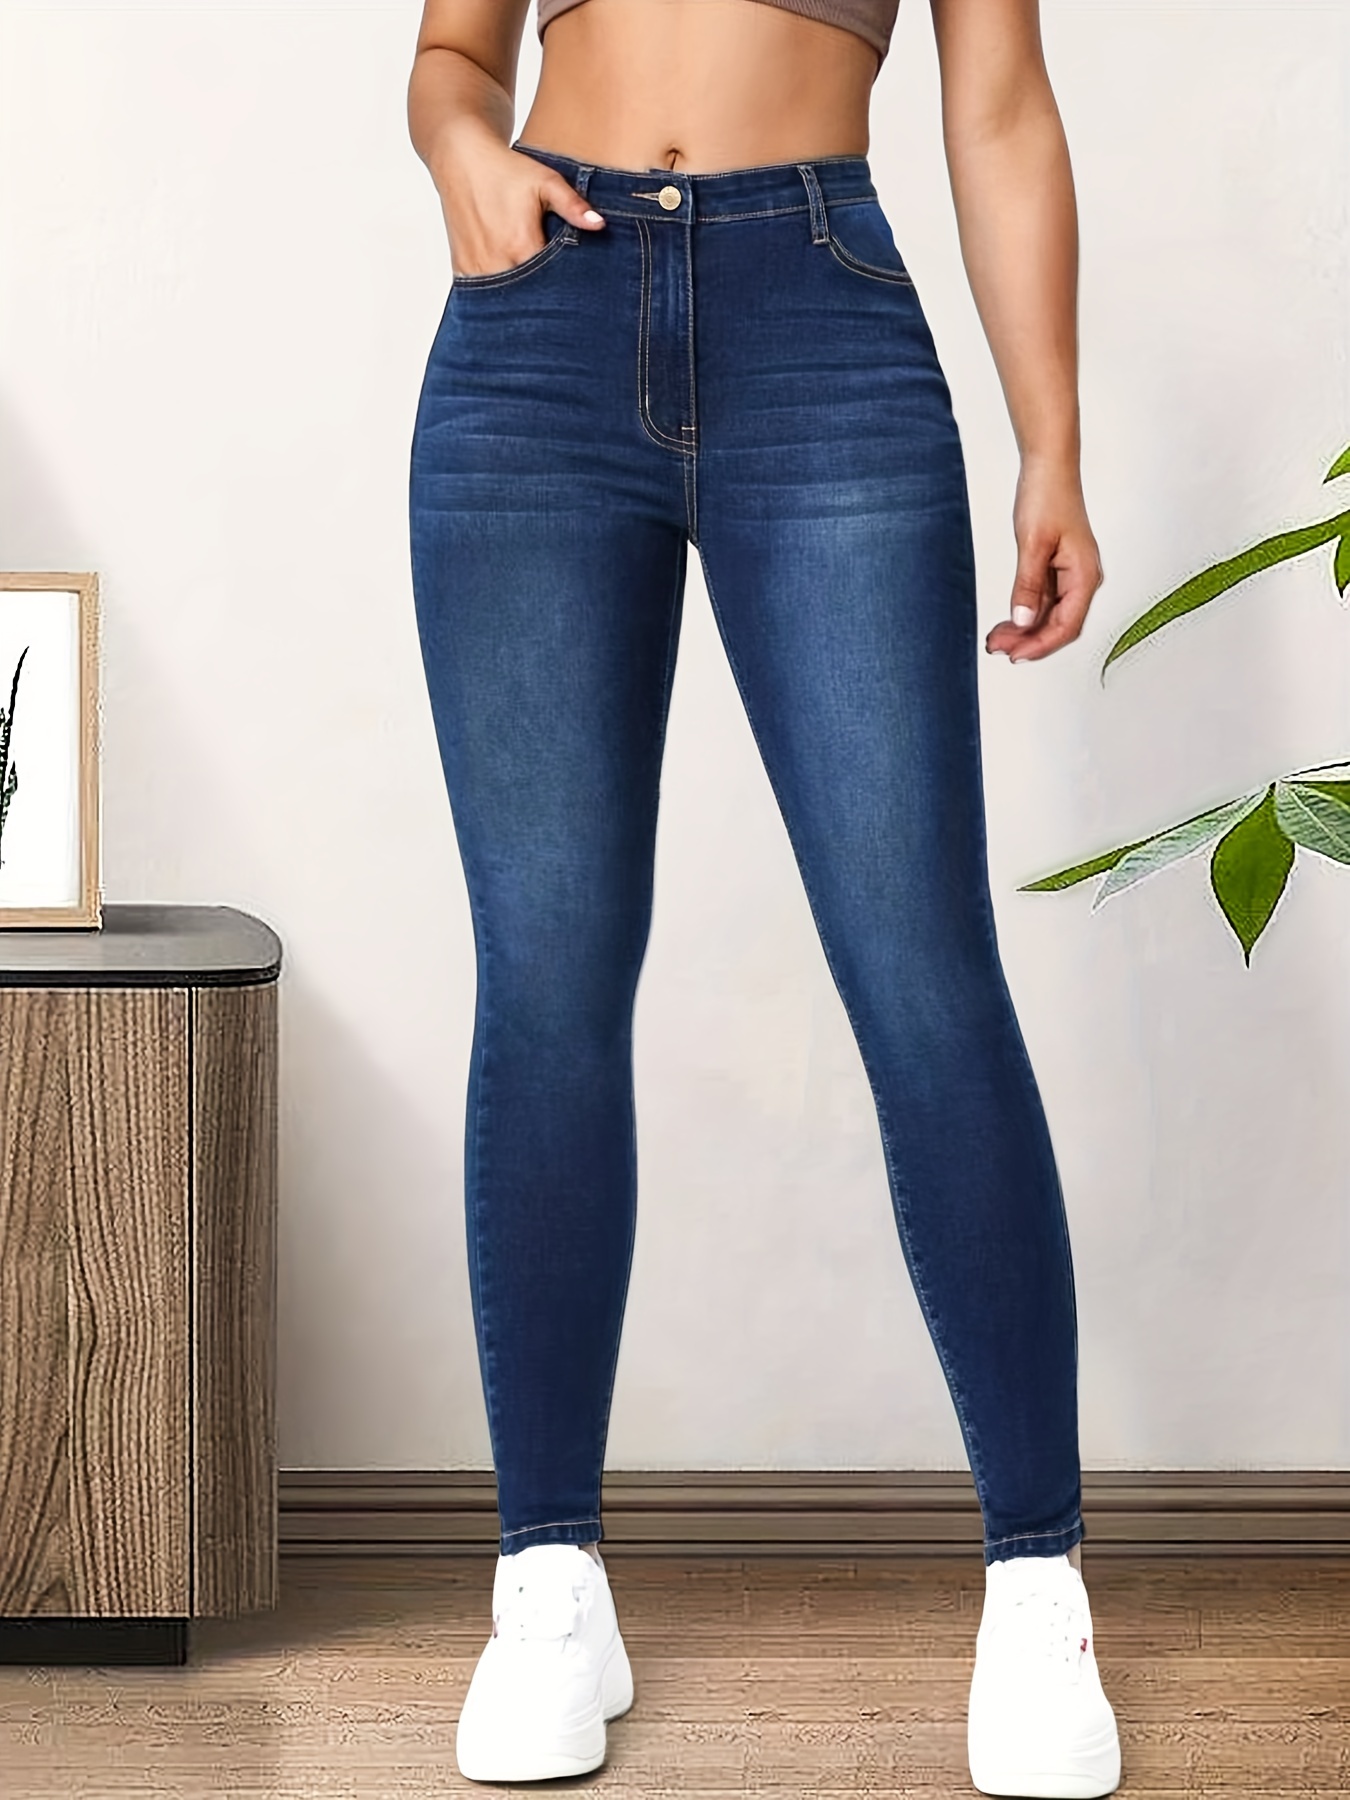 High Waisted Jeans Outfit Dark Blue New Look Stretch Skinny Jeans Womens  Slimming Jeggings Fitness Workout - Jeans - AliExpress